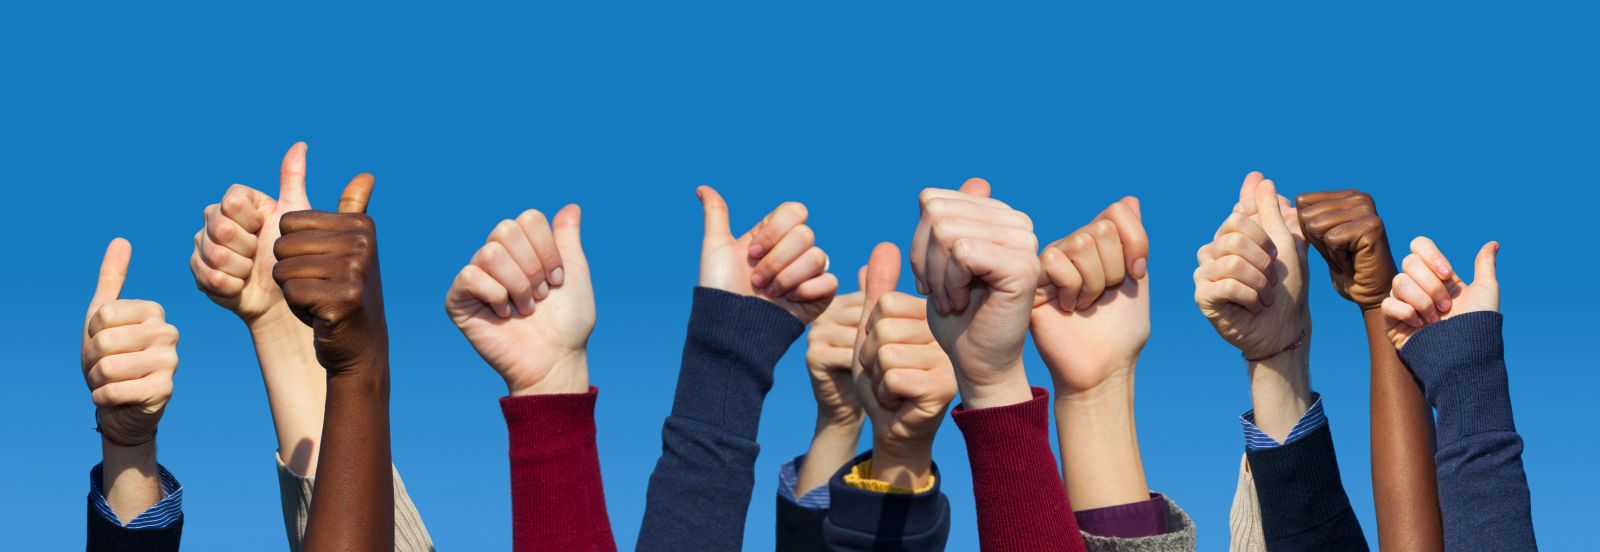 Group of hands raised in the air against the background of a blue sky banner image